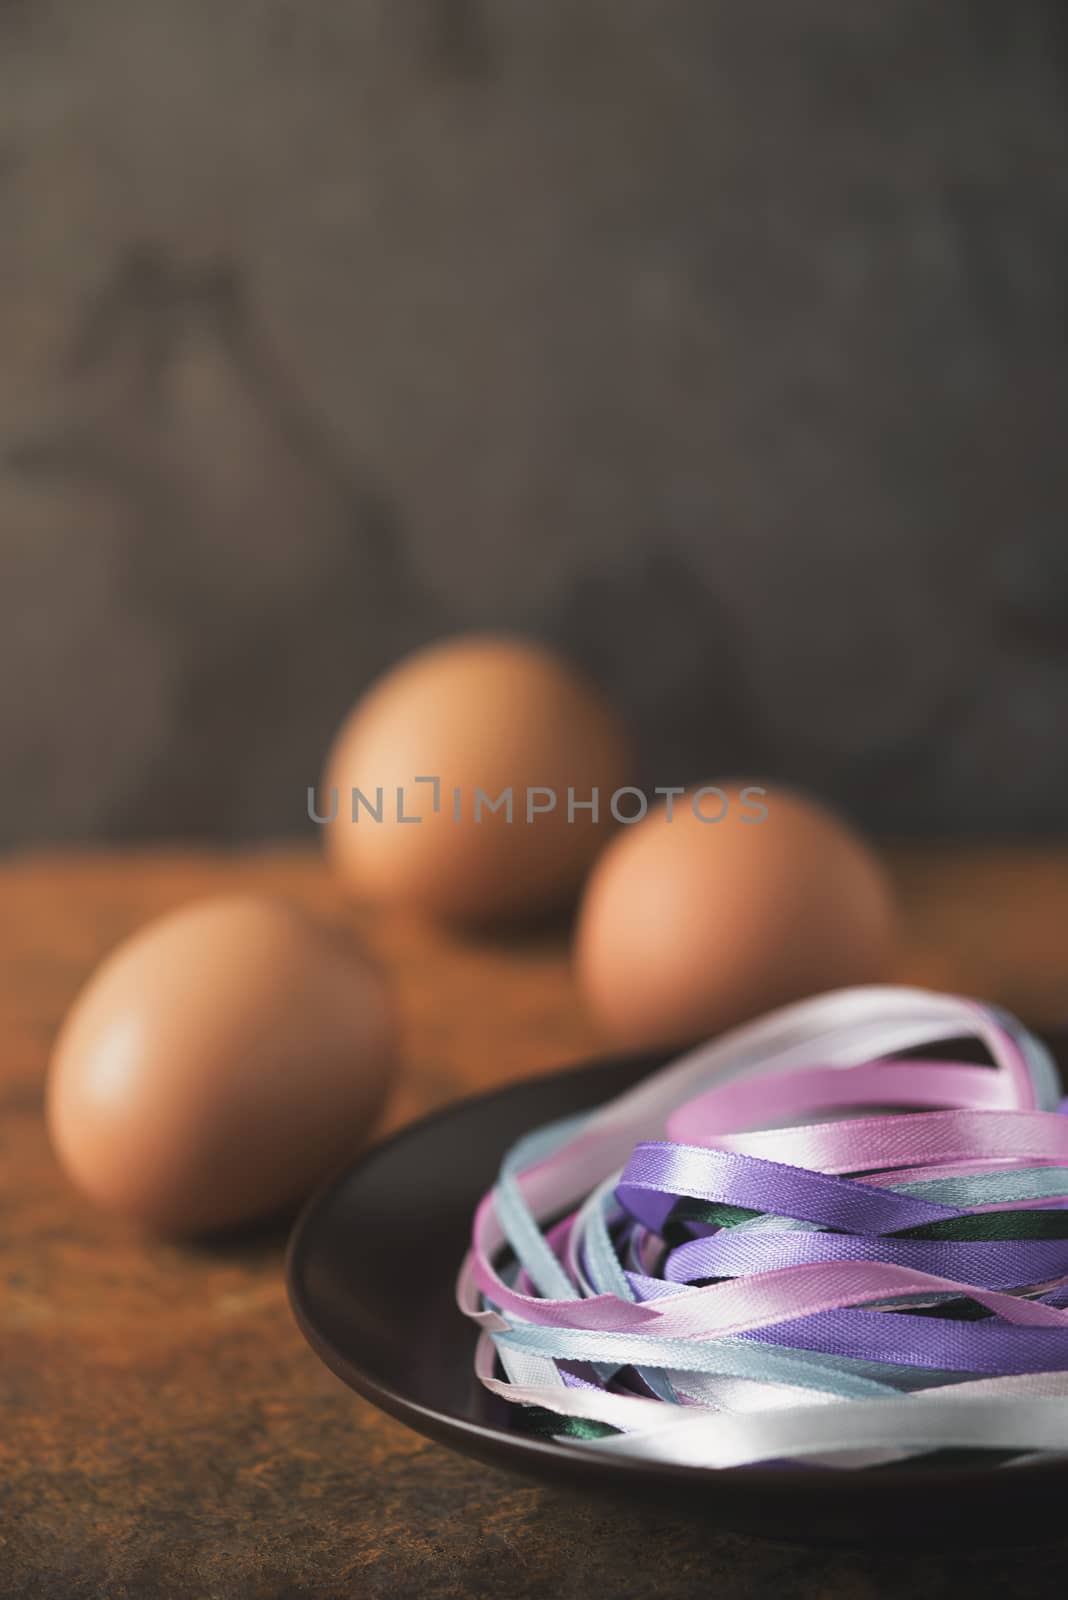 Blue ribbons in the plate with blurred eggs vertical by Deniskarpenkov